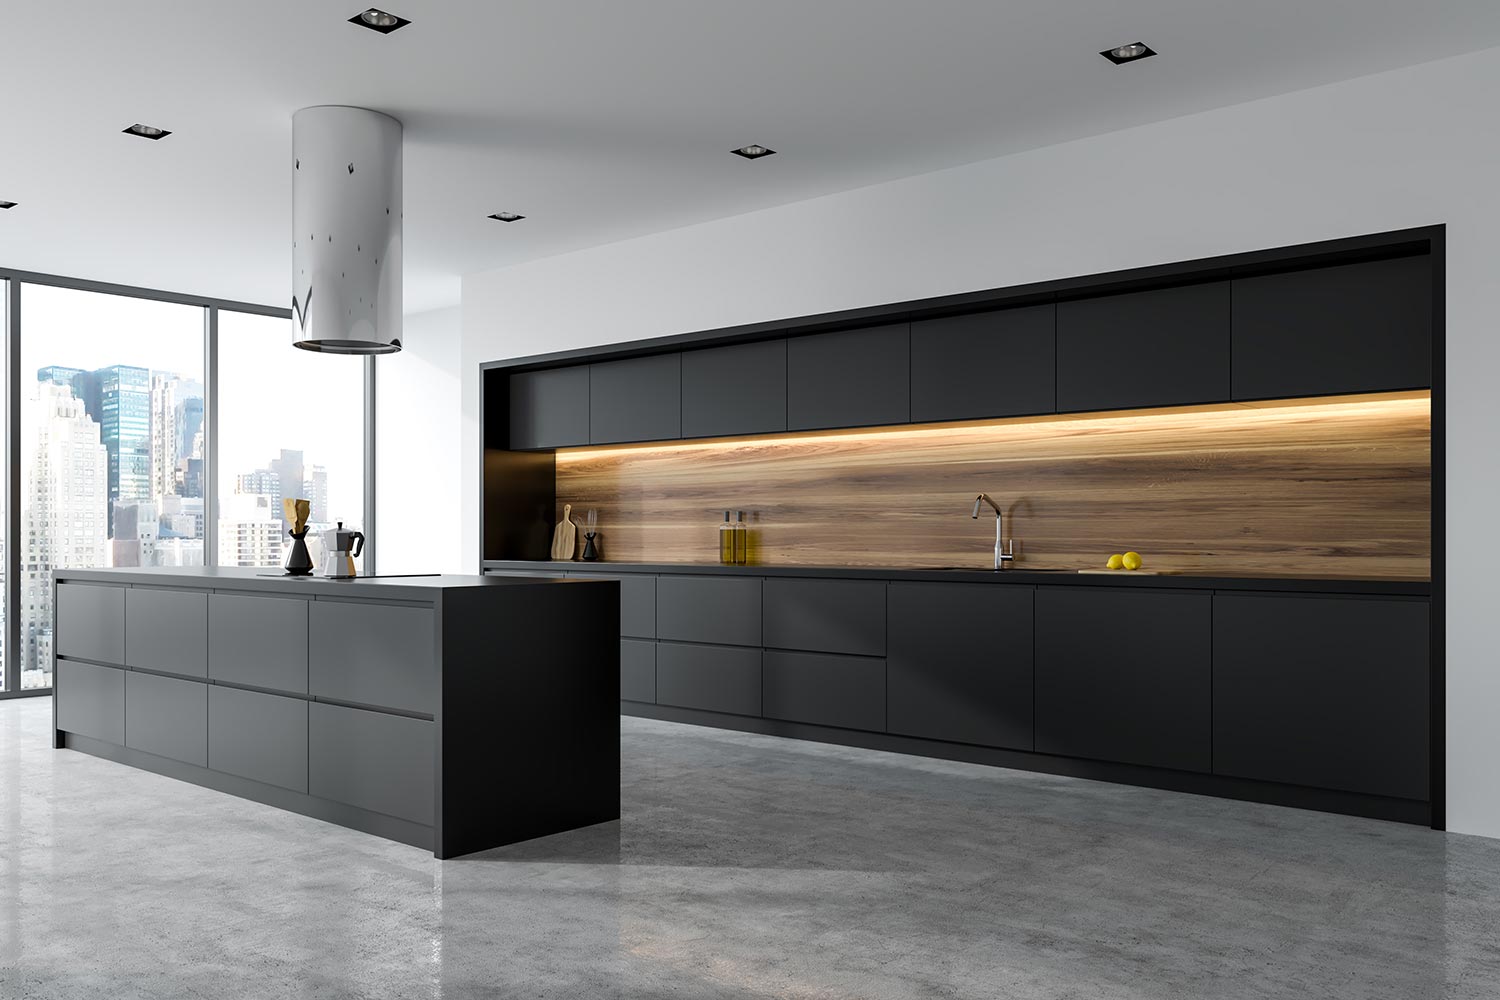 Panoramic black and wooden kitchen interior with black countertops and an island